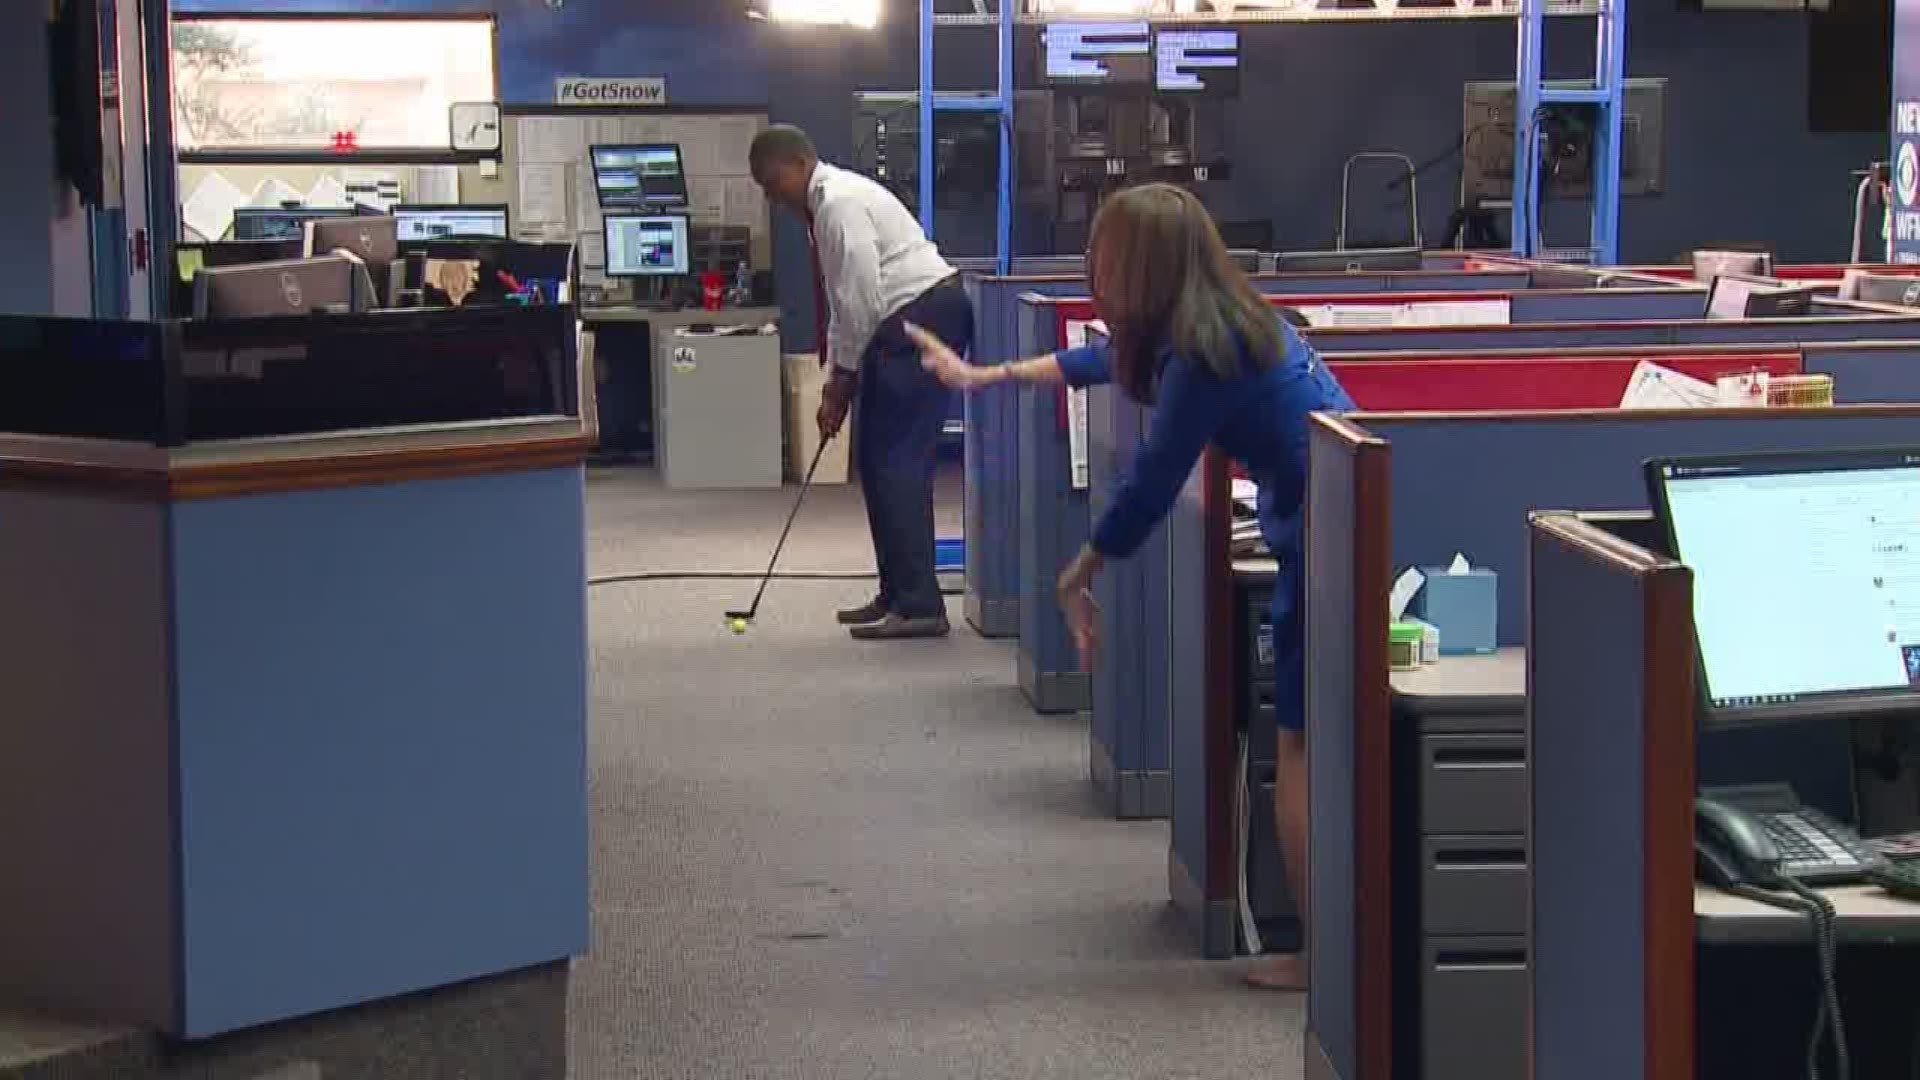 WFMY News 2 Plays "Golf" In Information Center